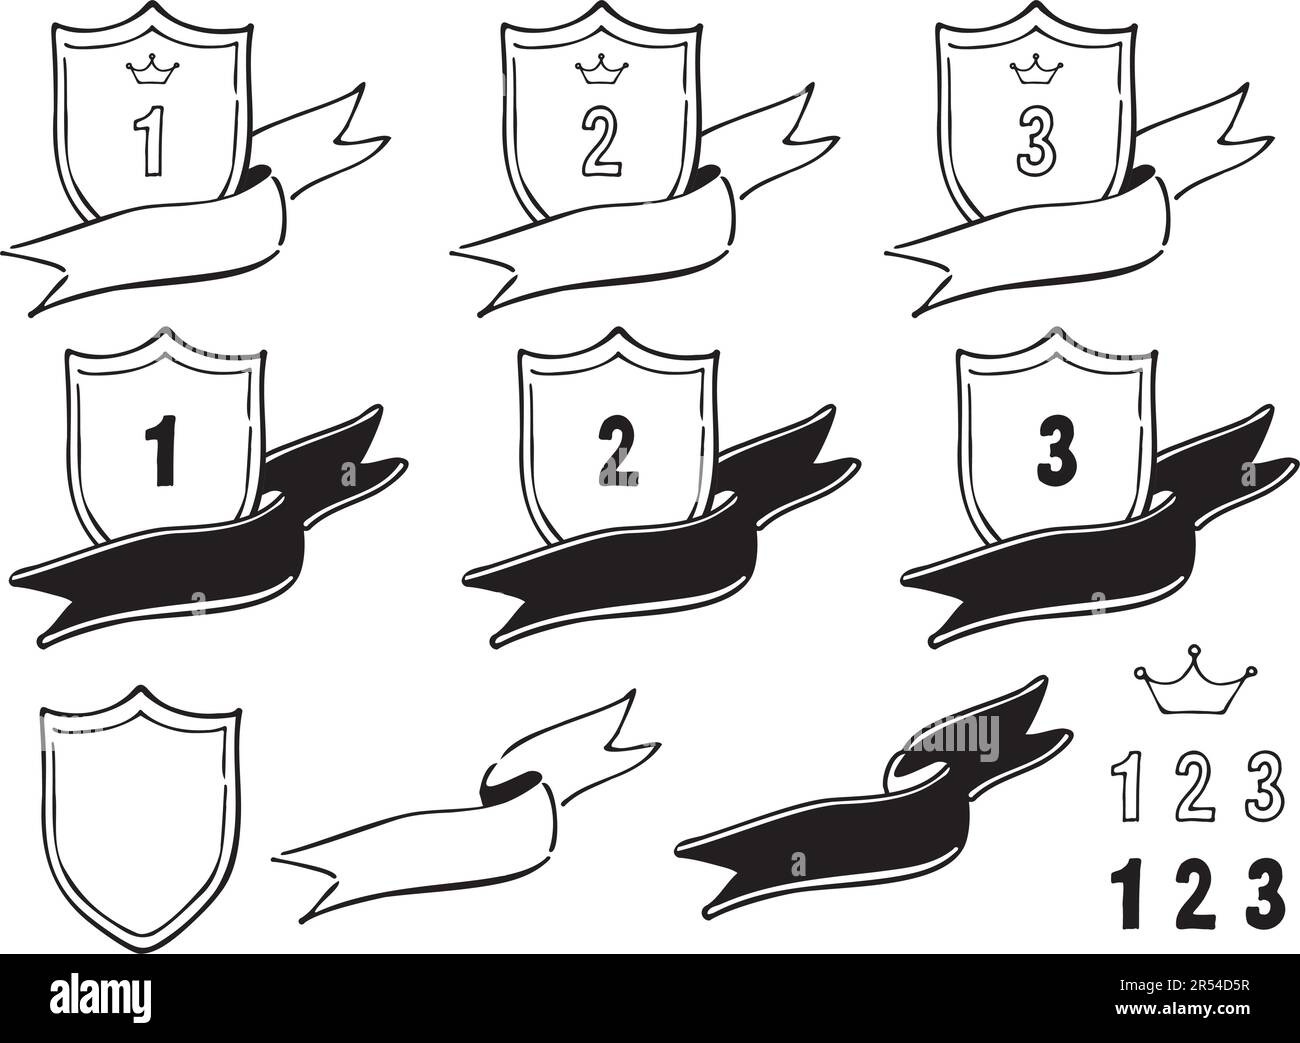 Ranking material for shields with fluttering ribbons. Black-and-white hand-drawn line drawings. Stock Vector